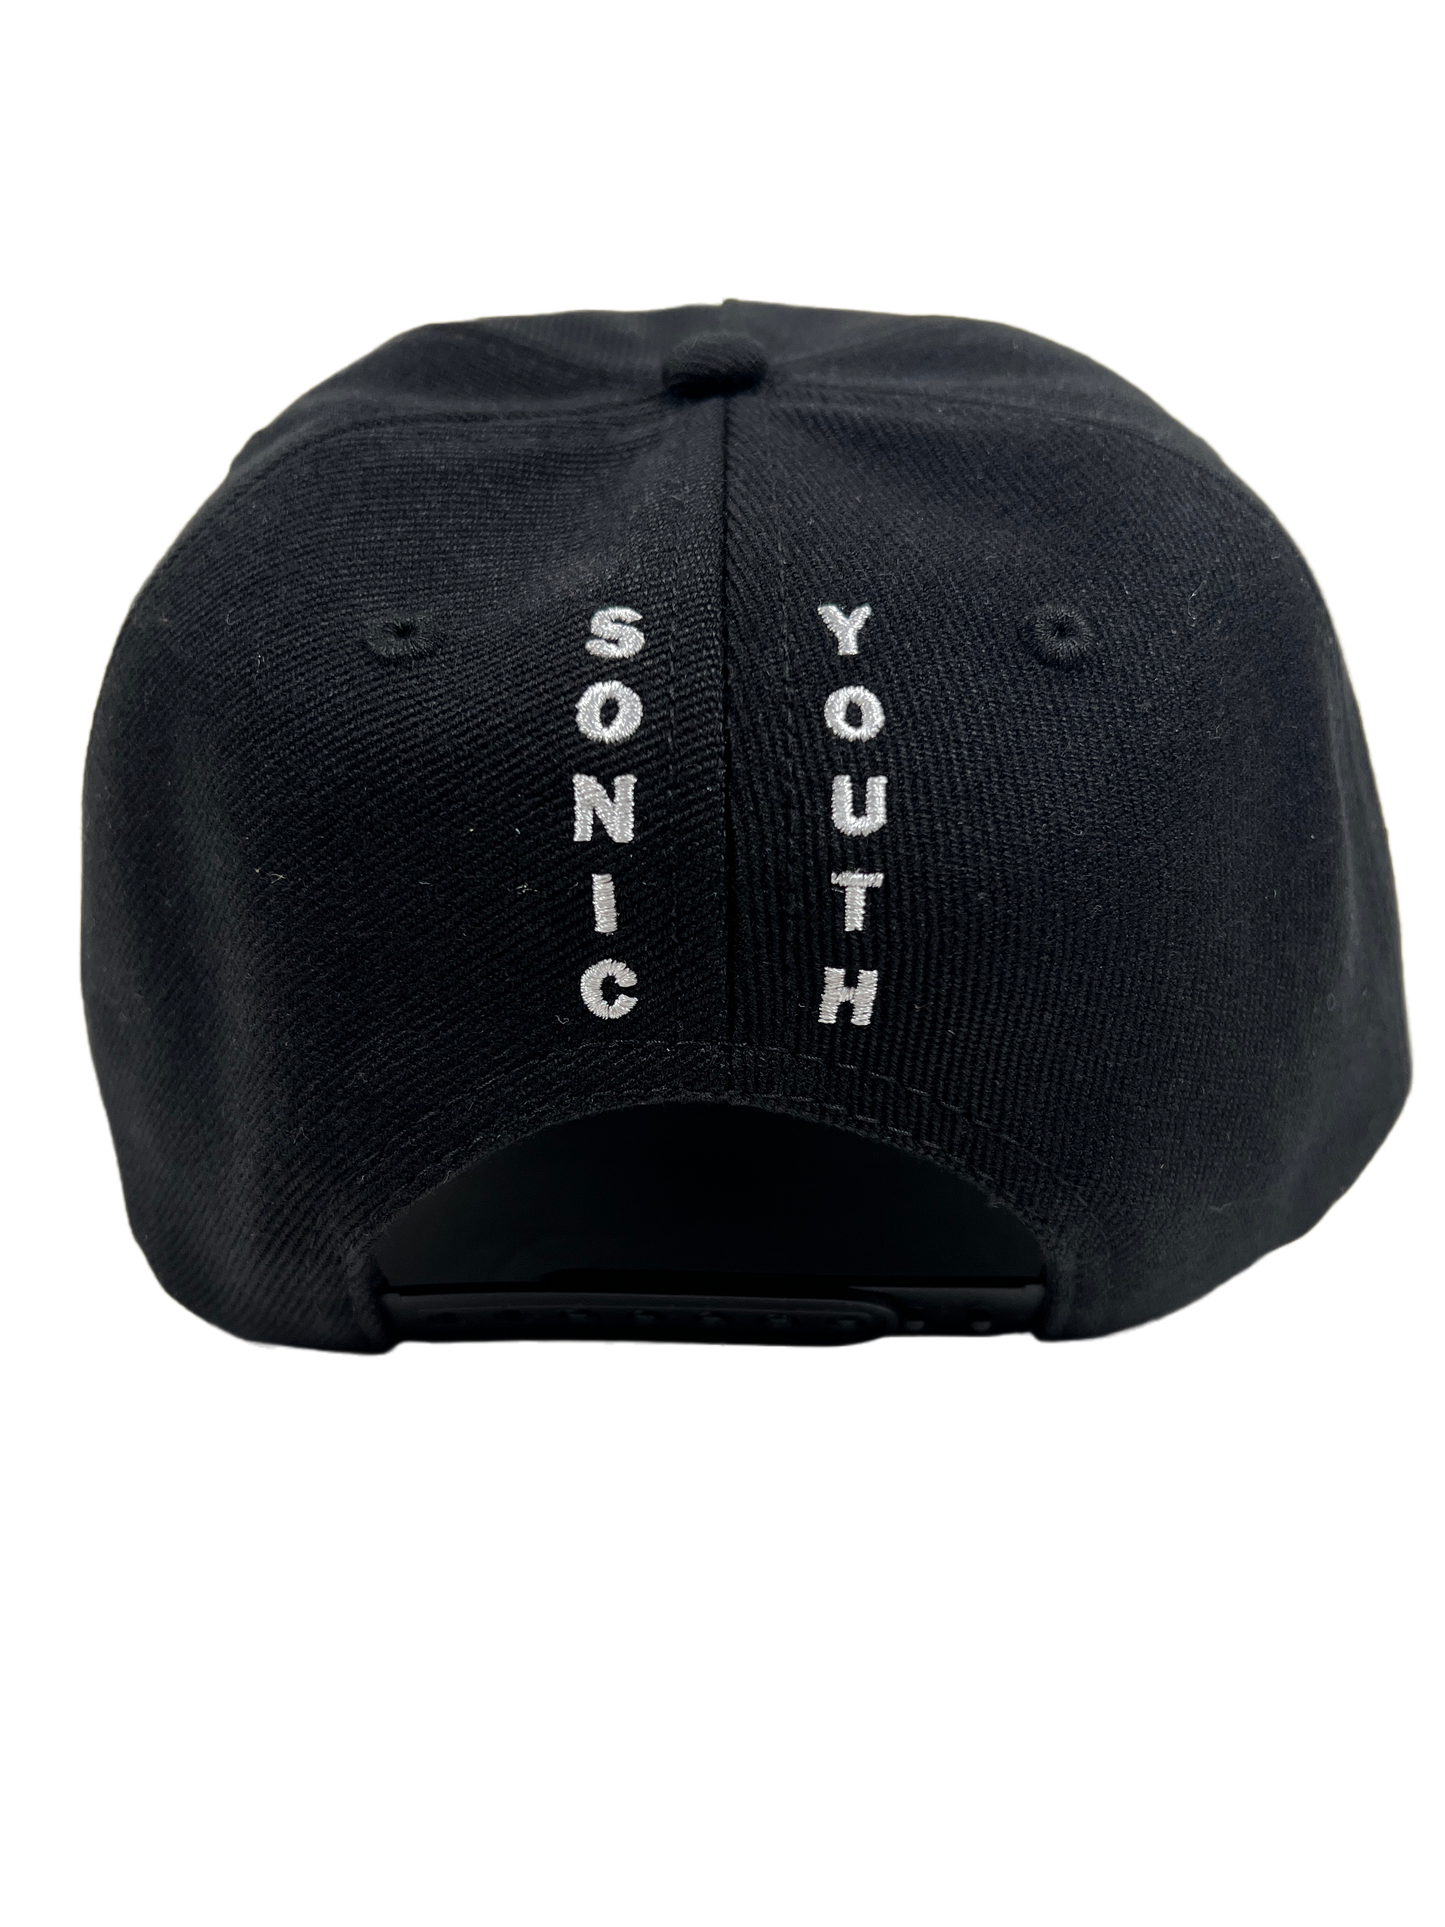 A black twill curved brim cap with the PLEASURES BUNNY SNAPBACK BLACK logo on it.